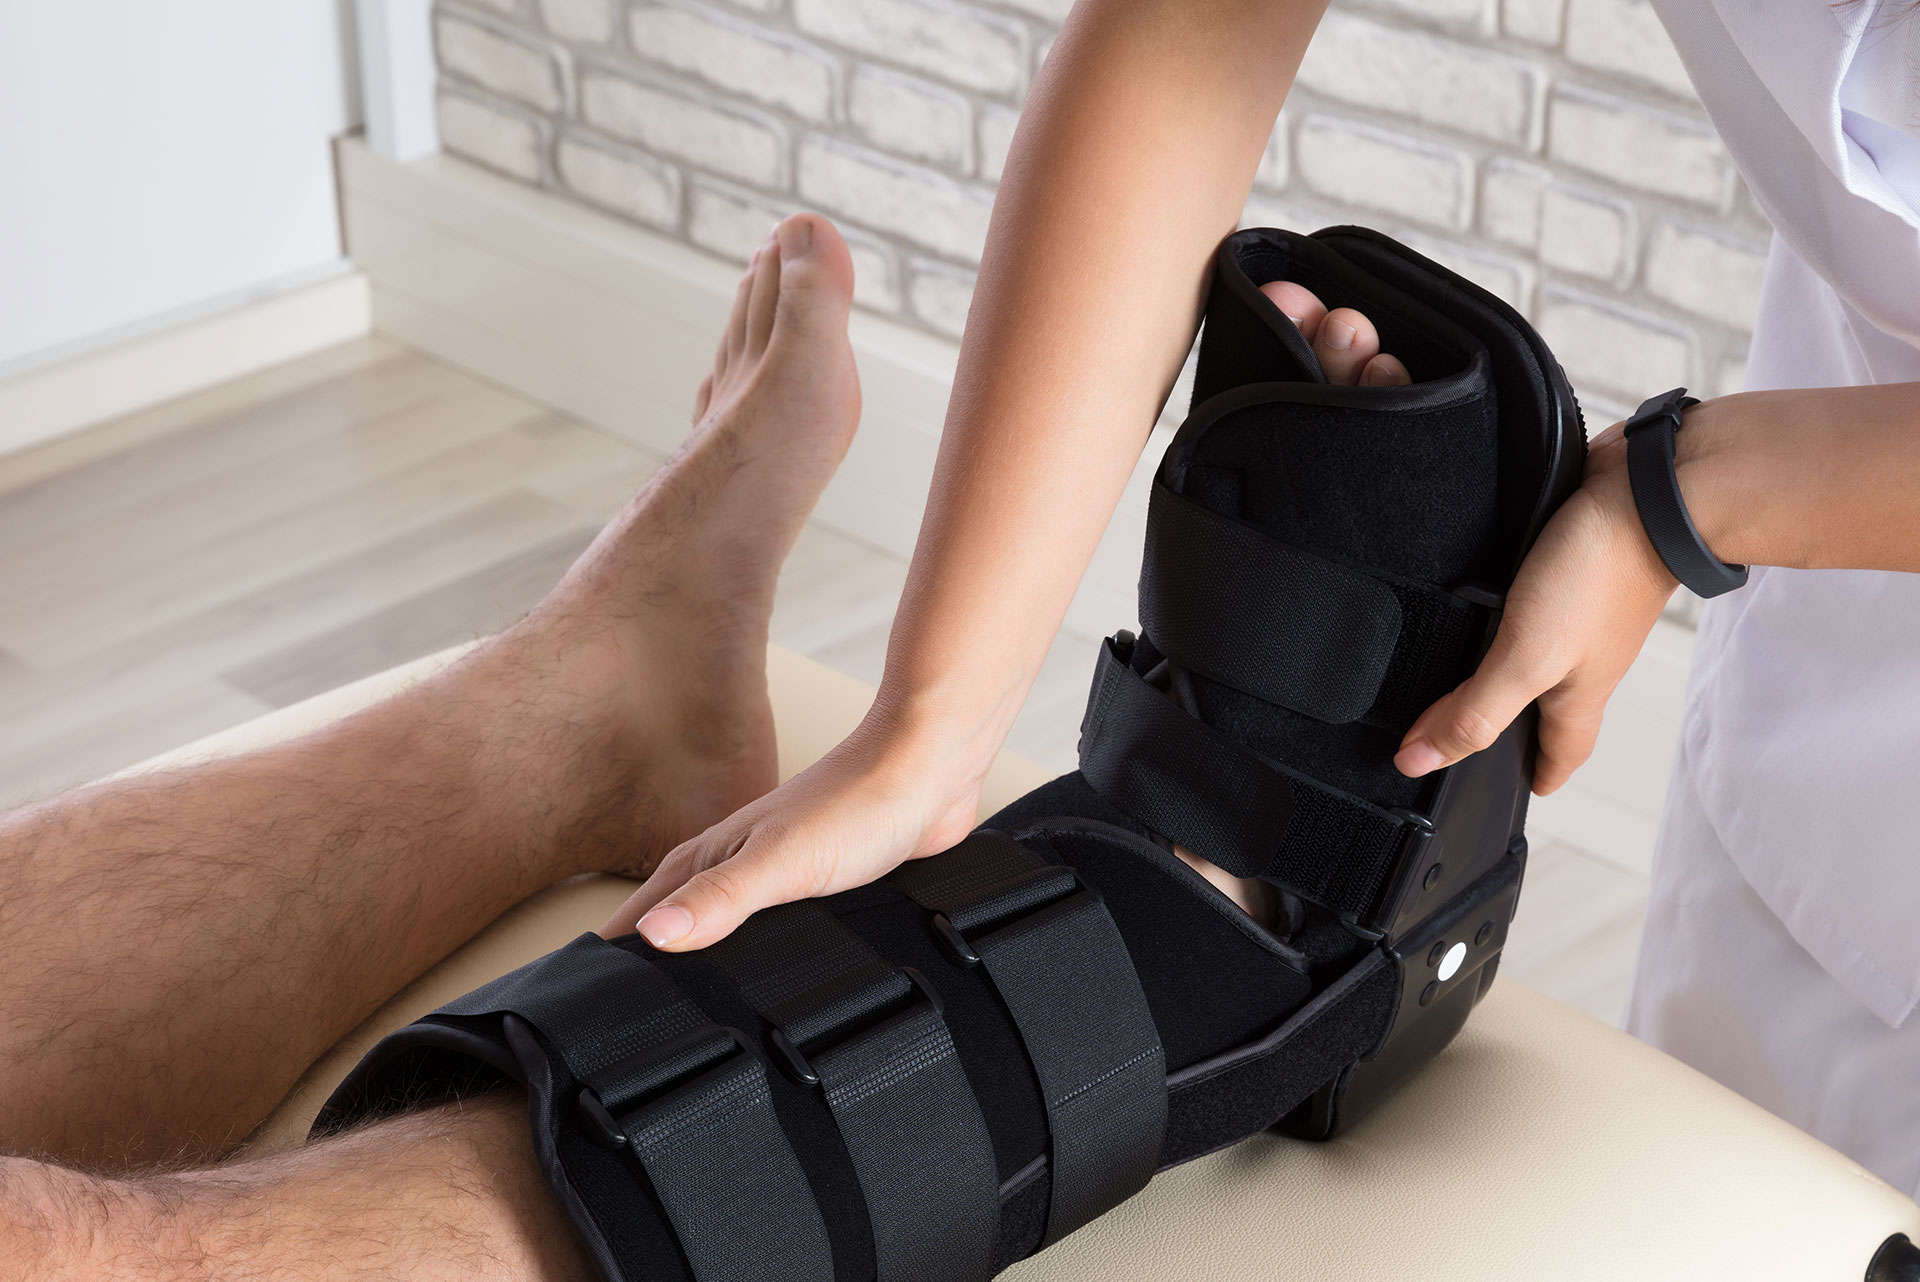 Premiere Pointe Podiatry | Laser Treatment, Ankle Sprains and Wound Care